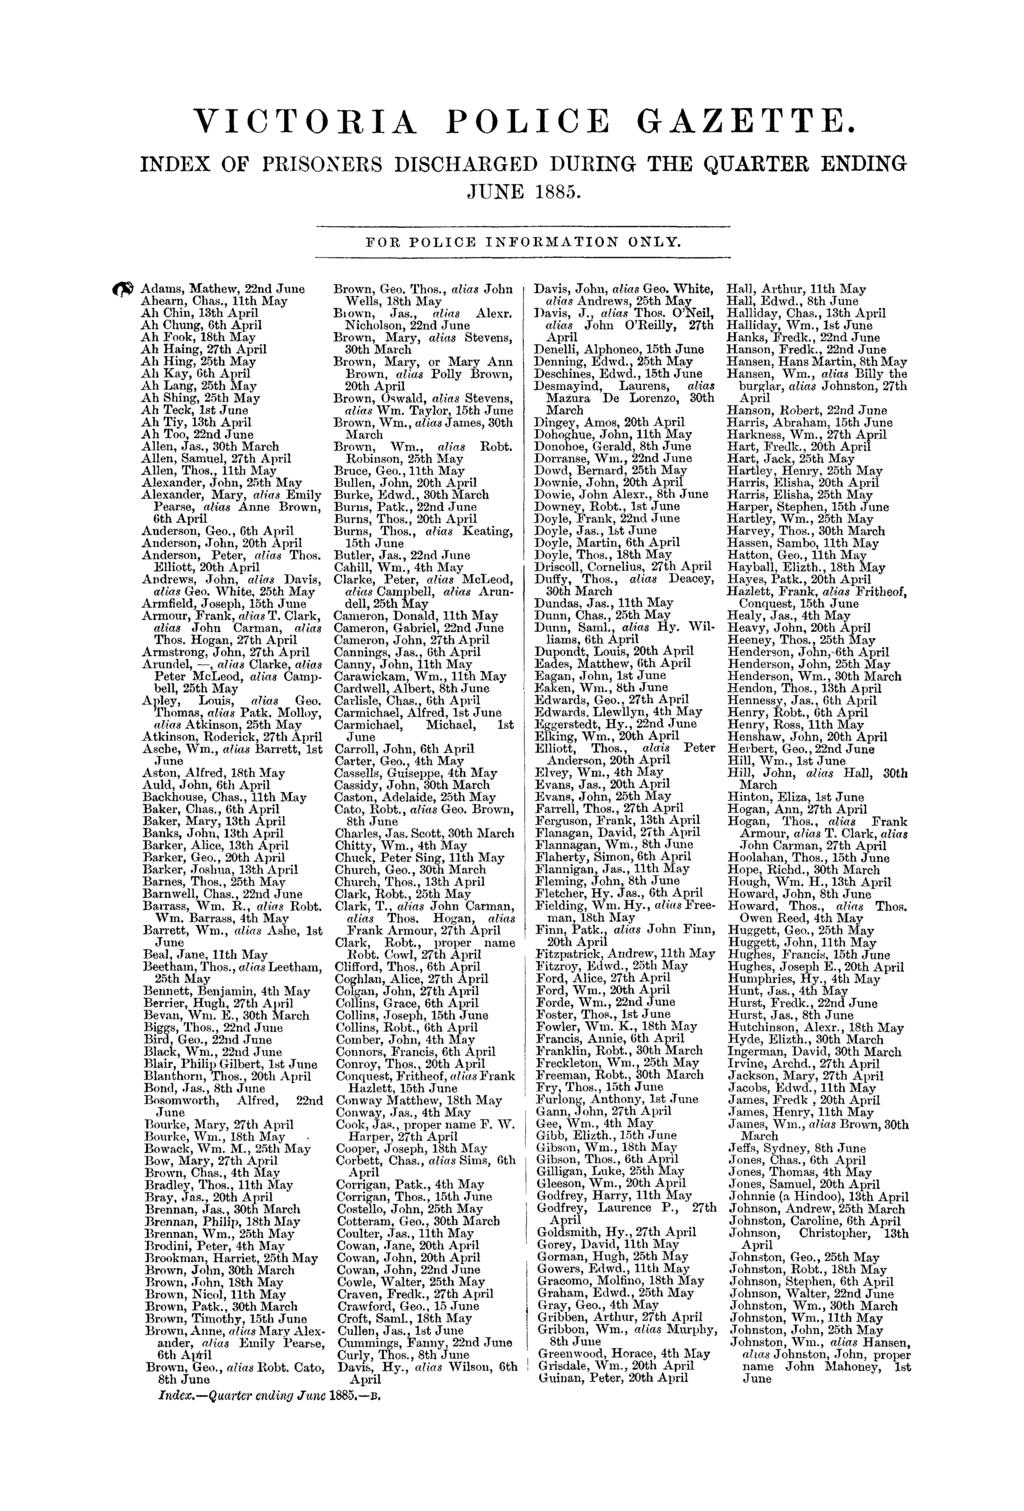 ep VICTORIA POLICE GAZETTE. INDEX OF PRISONERS DISCHARGED DURING THE QUARTER ENDING JUNE 1885. FOR POLICE INFORMATION ONLY. Adams, Mathew, 22nd Julie Brown, Geo. Thos., alias John Ahearn, Chas.